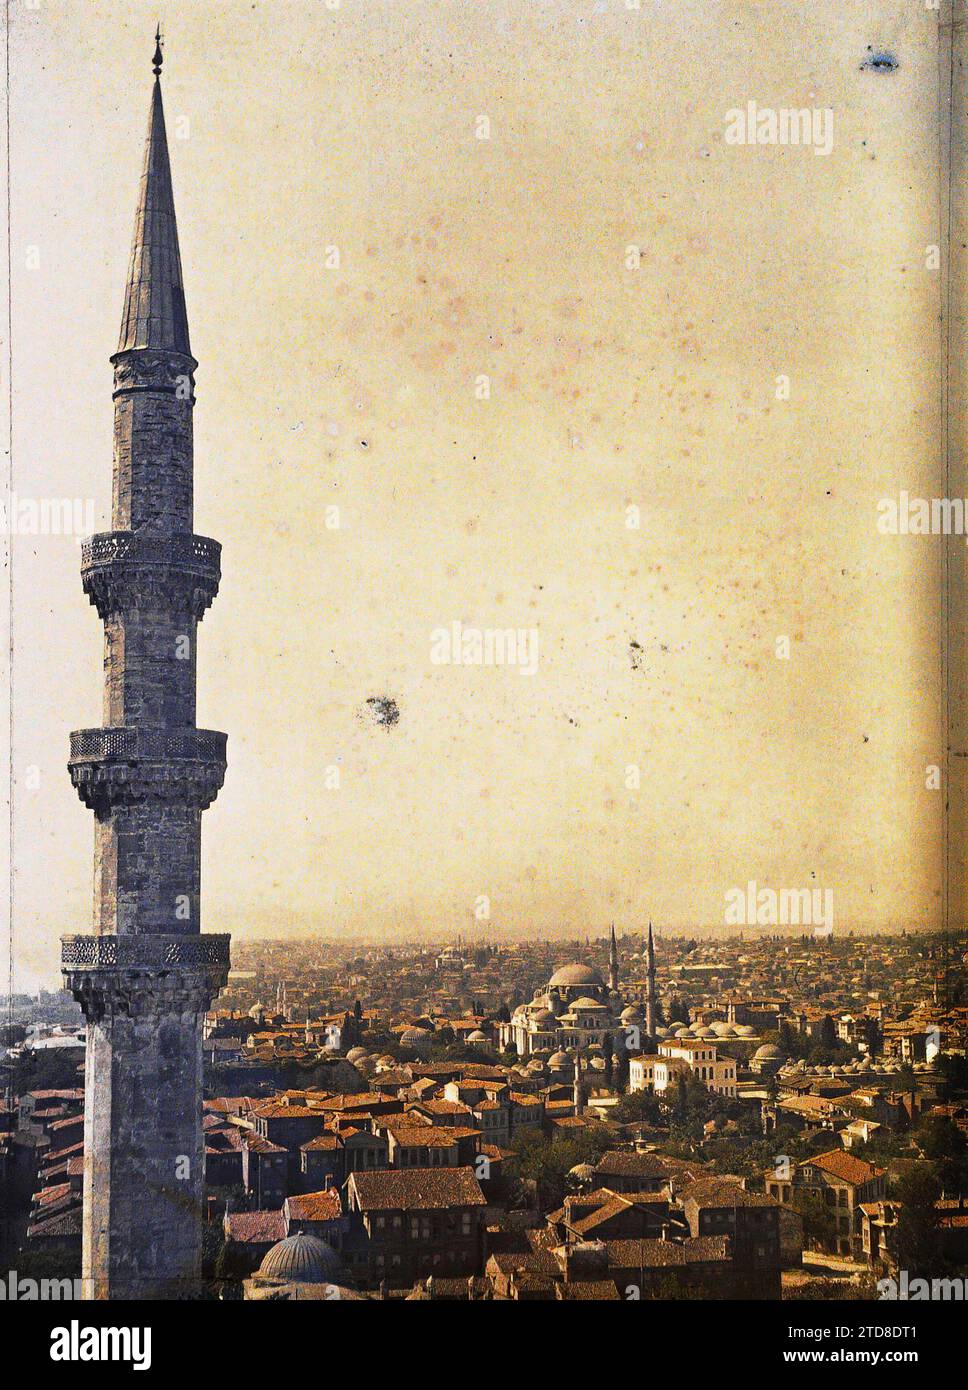 Constantinople (current Istanbul), Turkey Panorama taken from a minaret of the Süleymaniye Camii ('mosque of Sultan Suleiman the Magnificent') towards the southwest, Religion, Habitat, Architecture, Islam, Minaret, Mosque, Panorama of urban area, religious architecture, Turkey, Constantinople, Istanbul, 01/09/1912 - 30/09/1912, Passet, Stéphane, photographer, 1912 - Turquie - Stéphane Passet - (September), Autochrome, photo, Glass, Autochrome, photo, Positive, Vertical, Size 9 x 12 cm Stock Photo